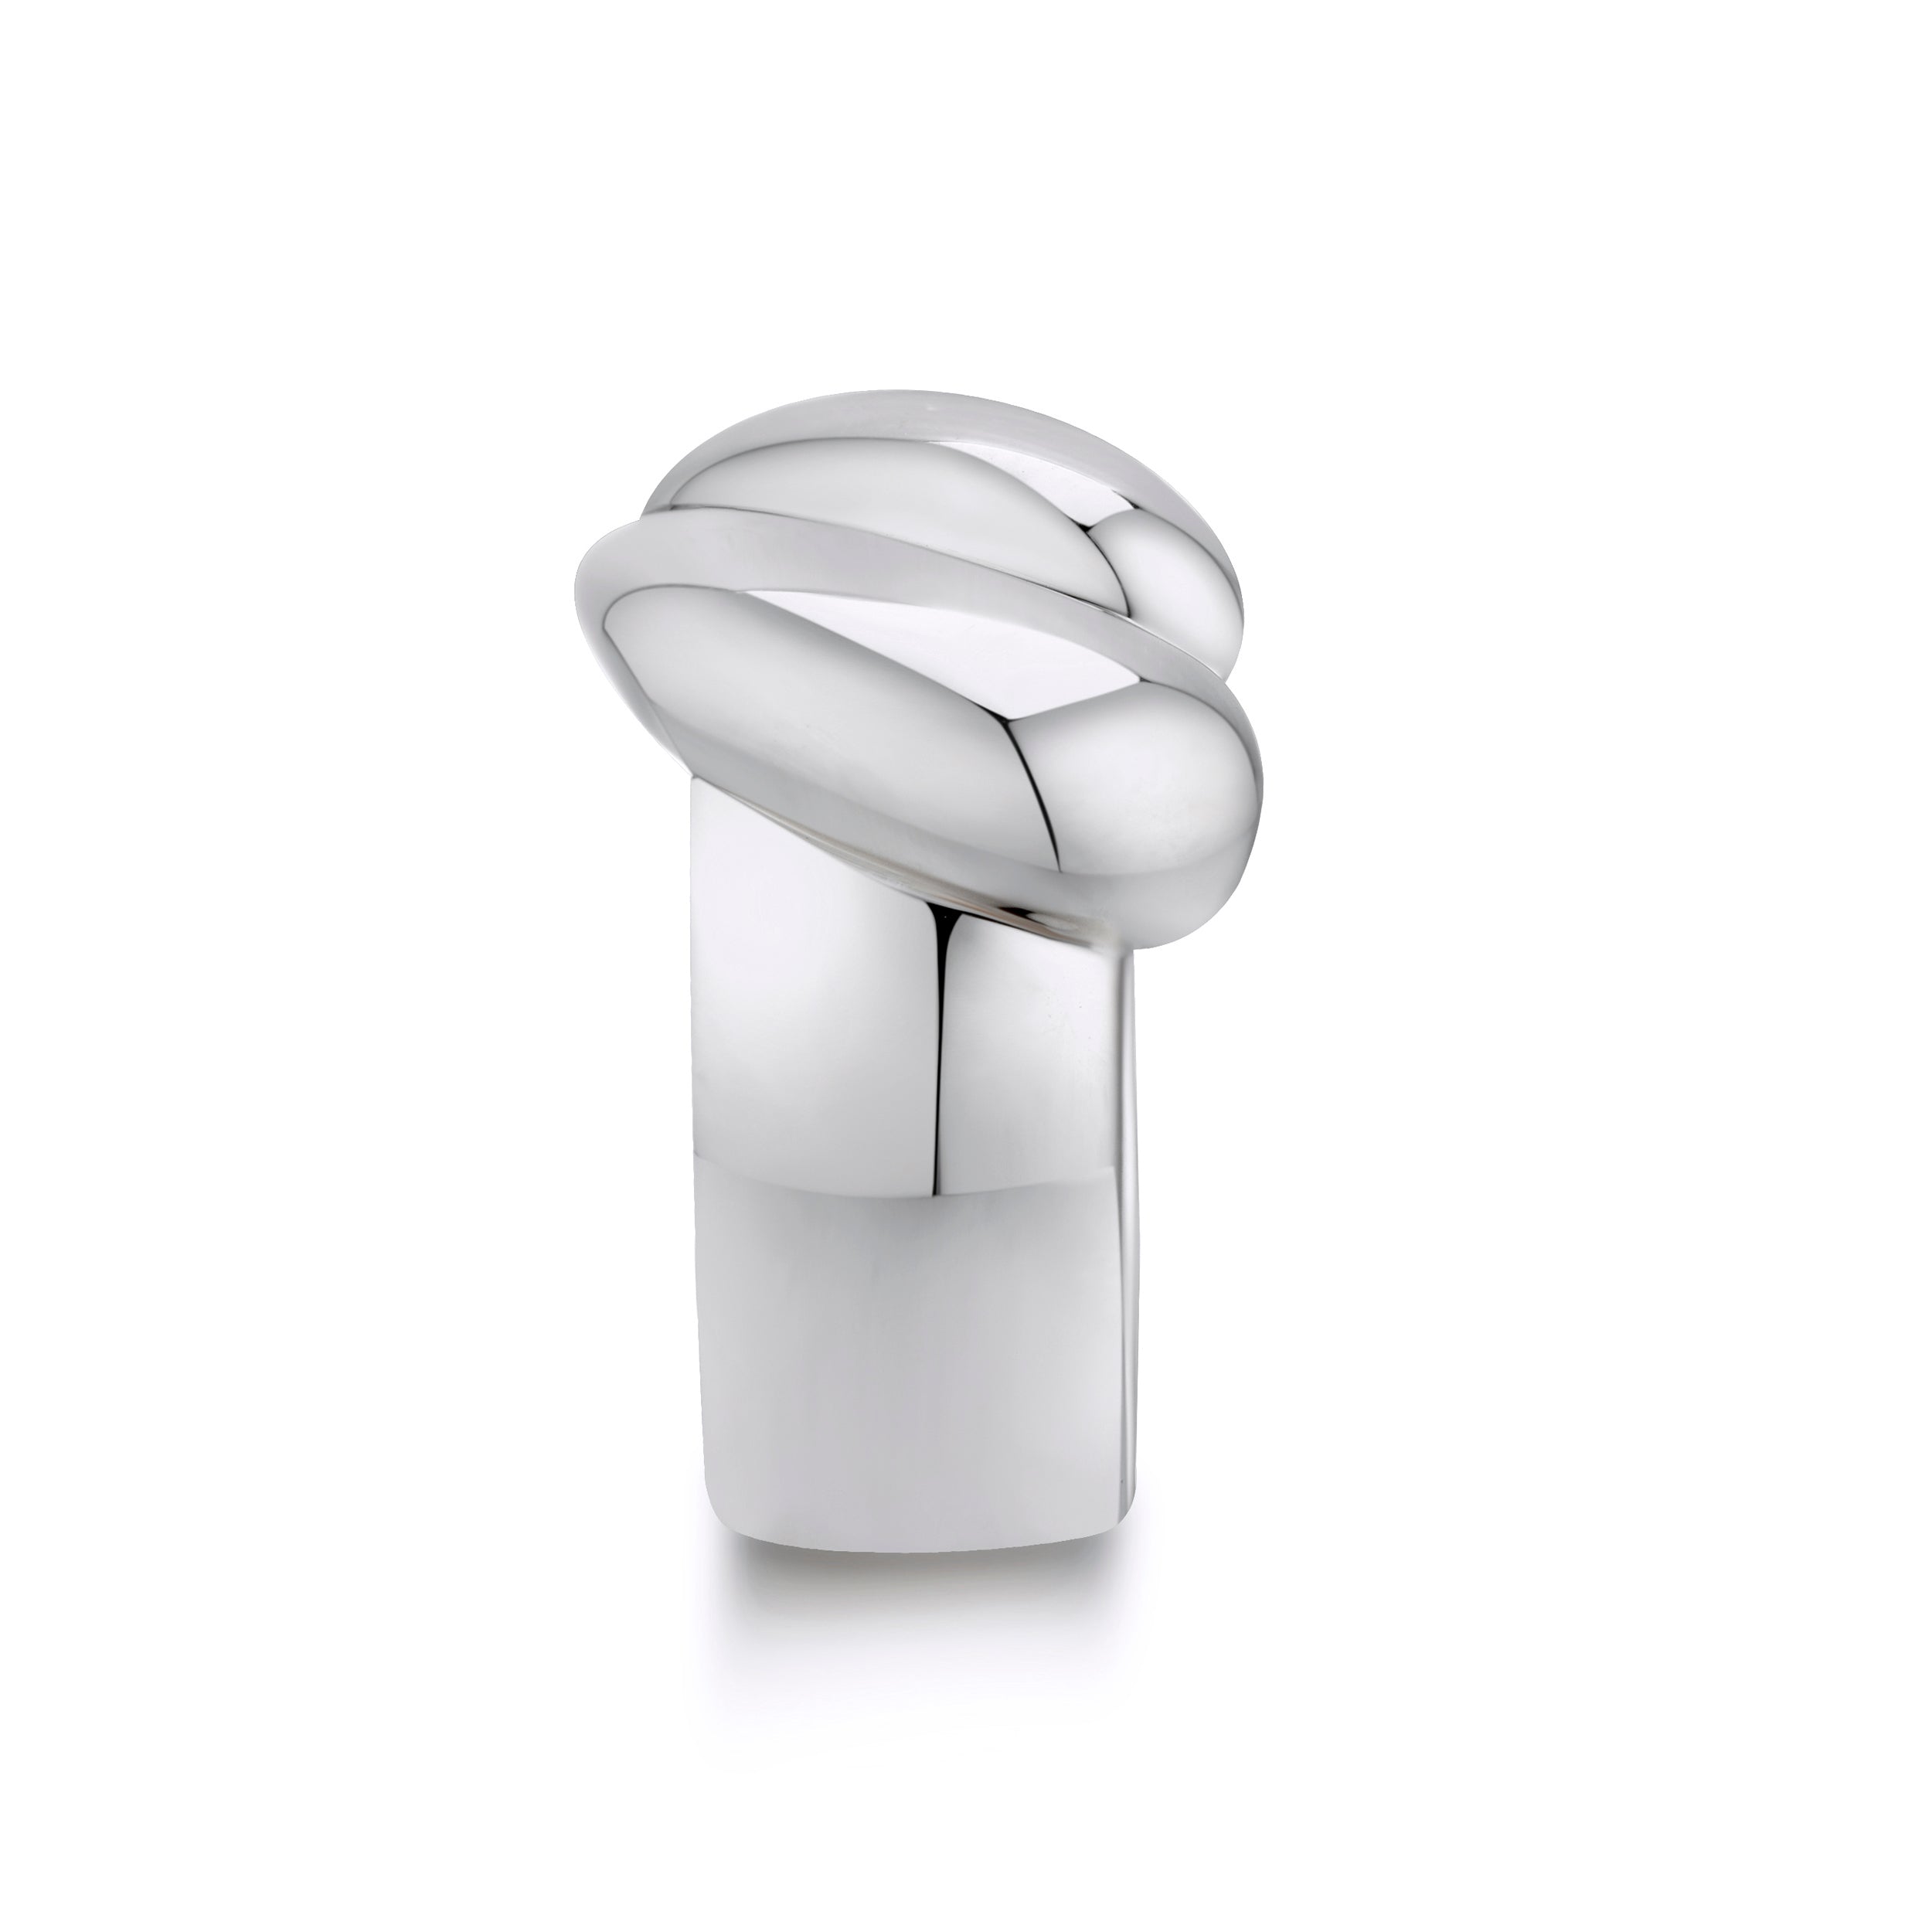 Mariana Chunky Silver Statement Ring